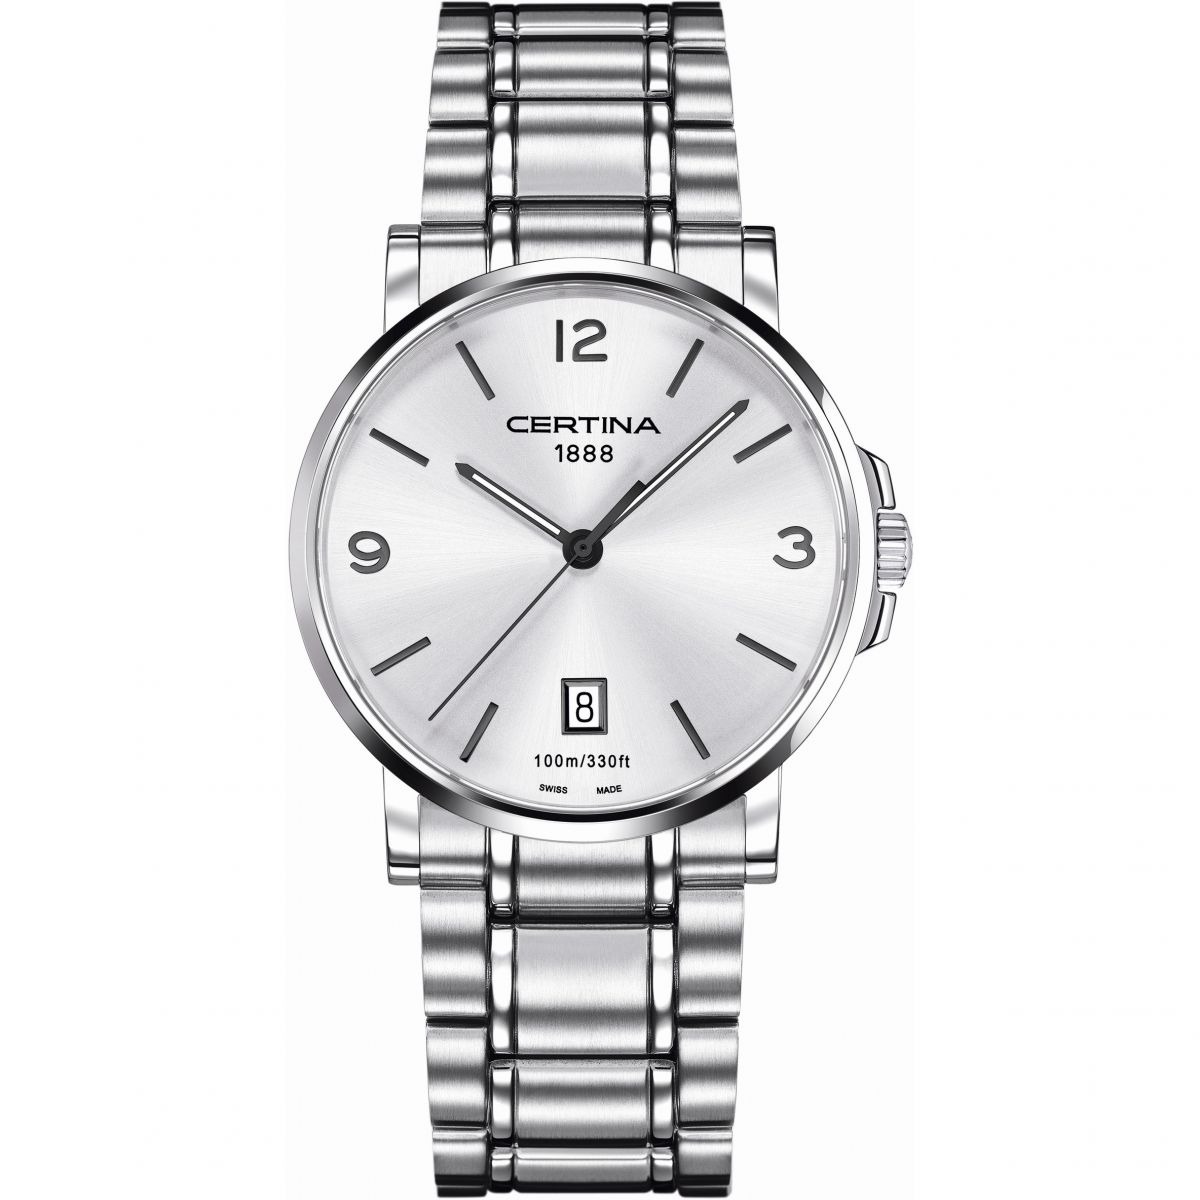 Certina - Silver Watch for Men at Watch Shop GOOFASH